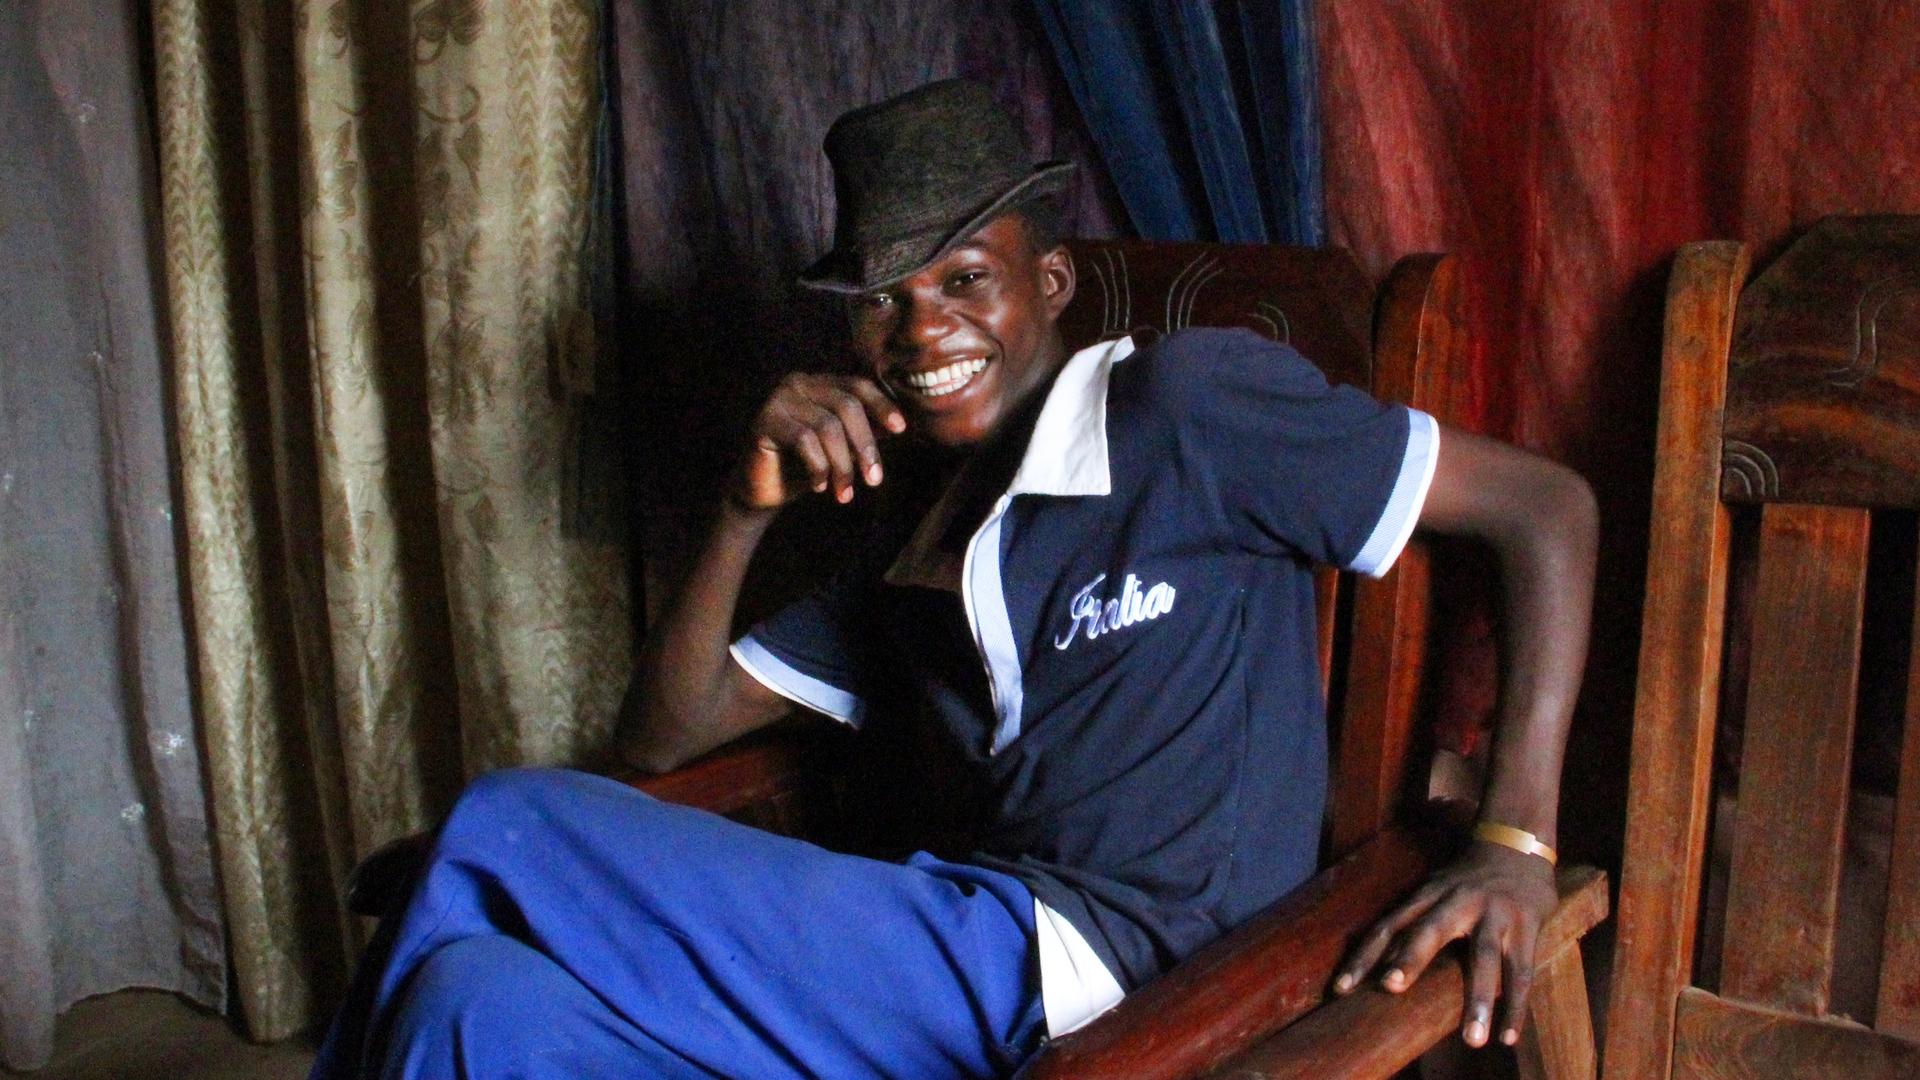 Fortuné, 16, used to have a spaghetti-and-coffee kiosk in Bangui. But it was dismantled one night. So now he's pinning his dreams on his singing group.